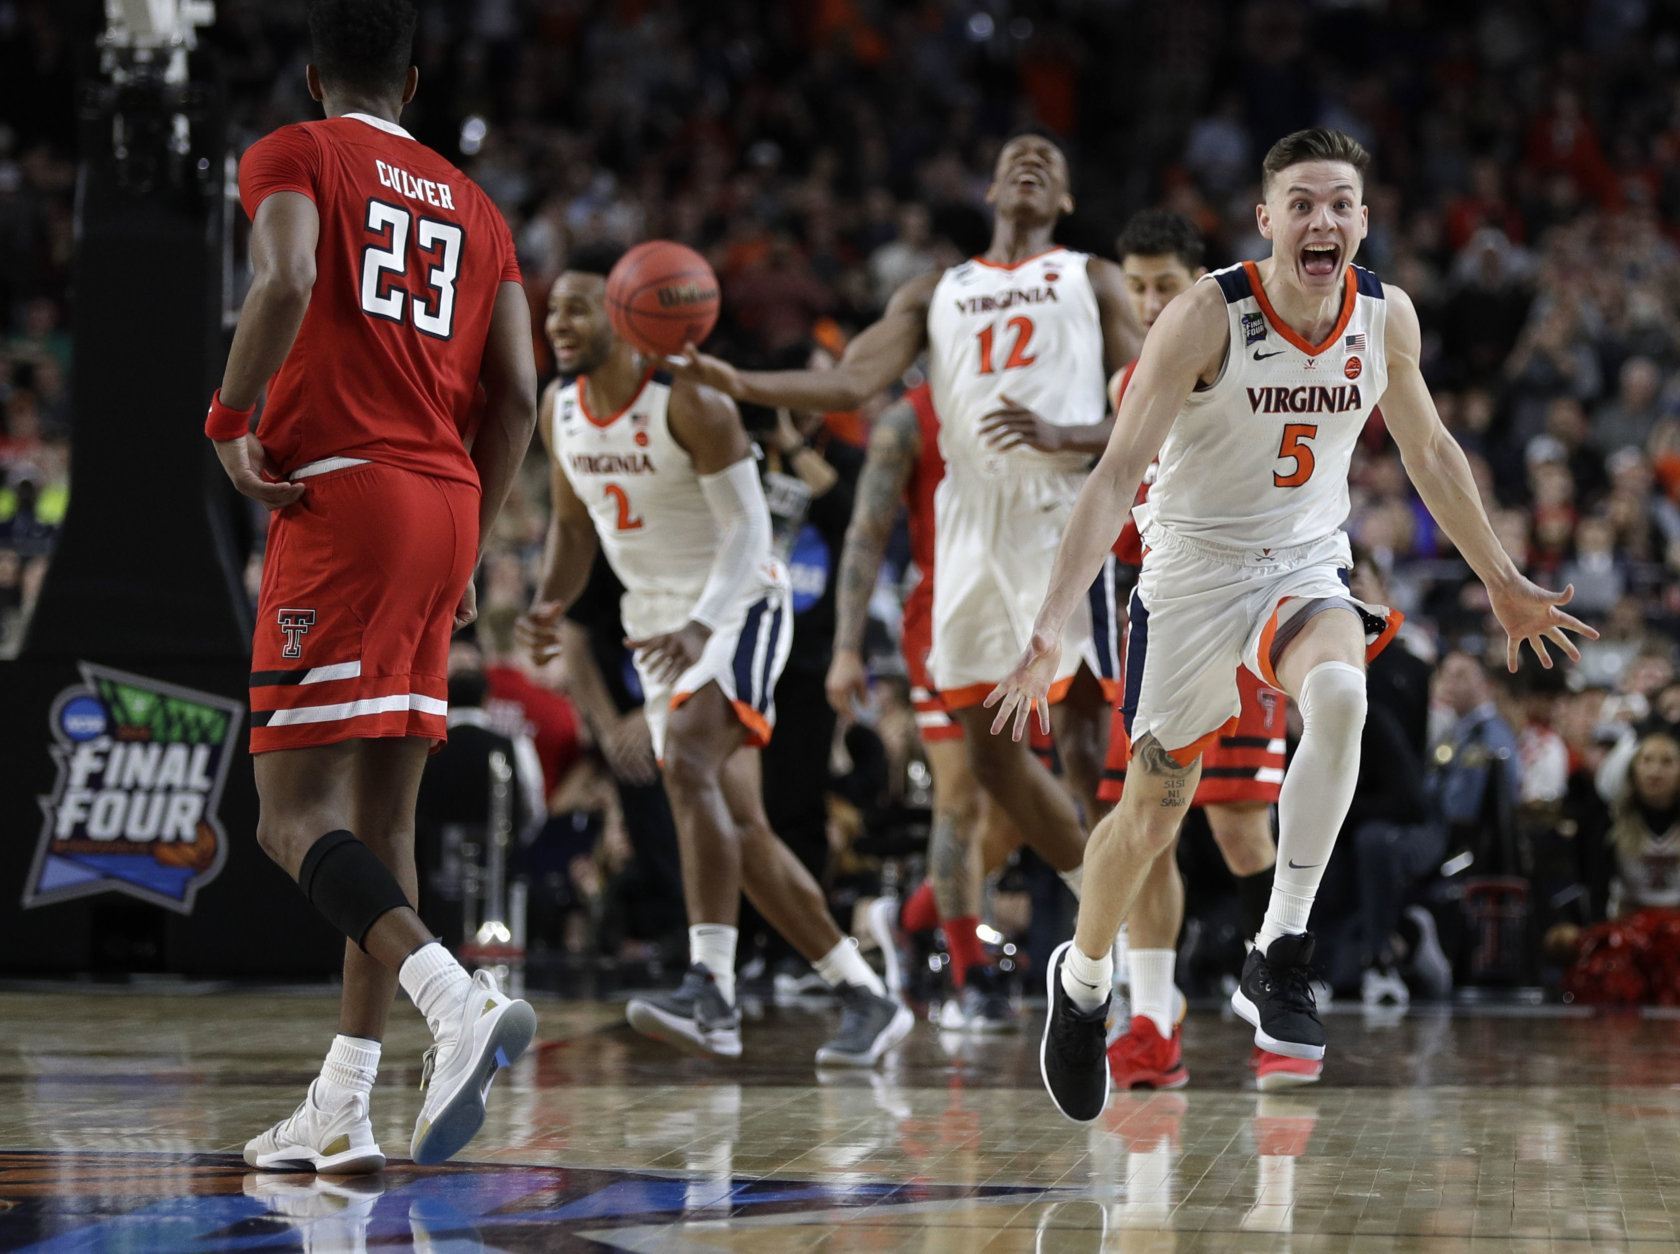 Virginia guard Kyle Guy (5) celebrates in front of Texas Tech guard Jarrett Culver (23) at the end of the championship game in the Final Four NCAA college basketball tournament, Monday, April 8, 2019, in Minneapolis. Virginia won 85-77 in overtime. (AP Photo/David J. Phillip)